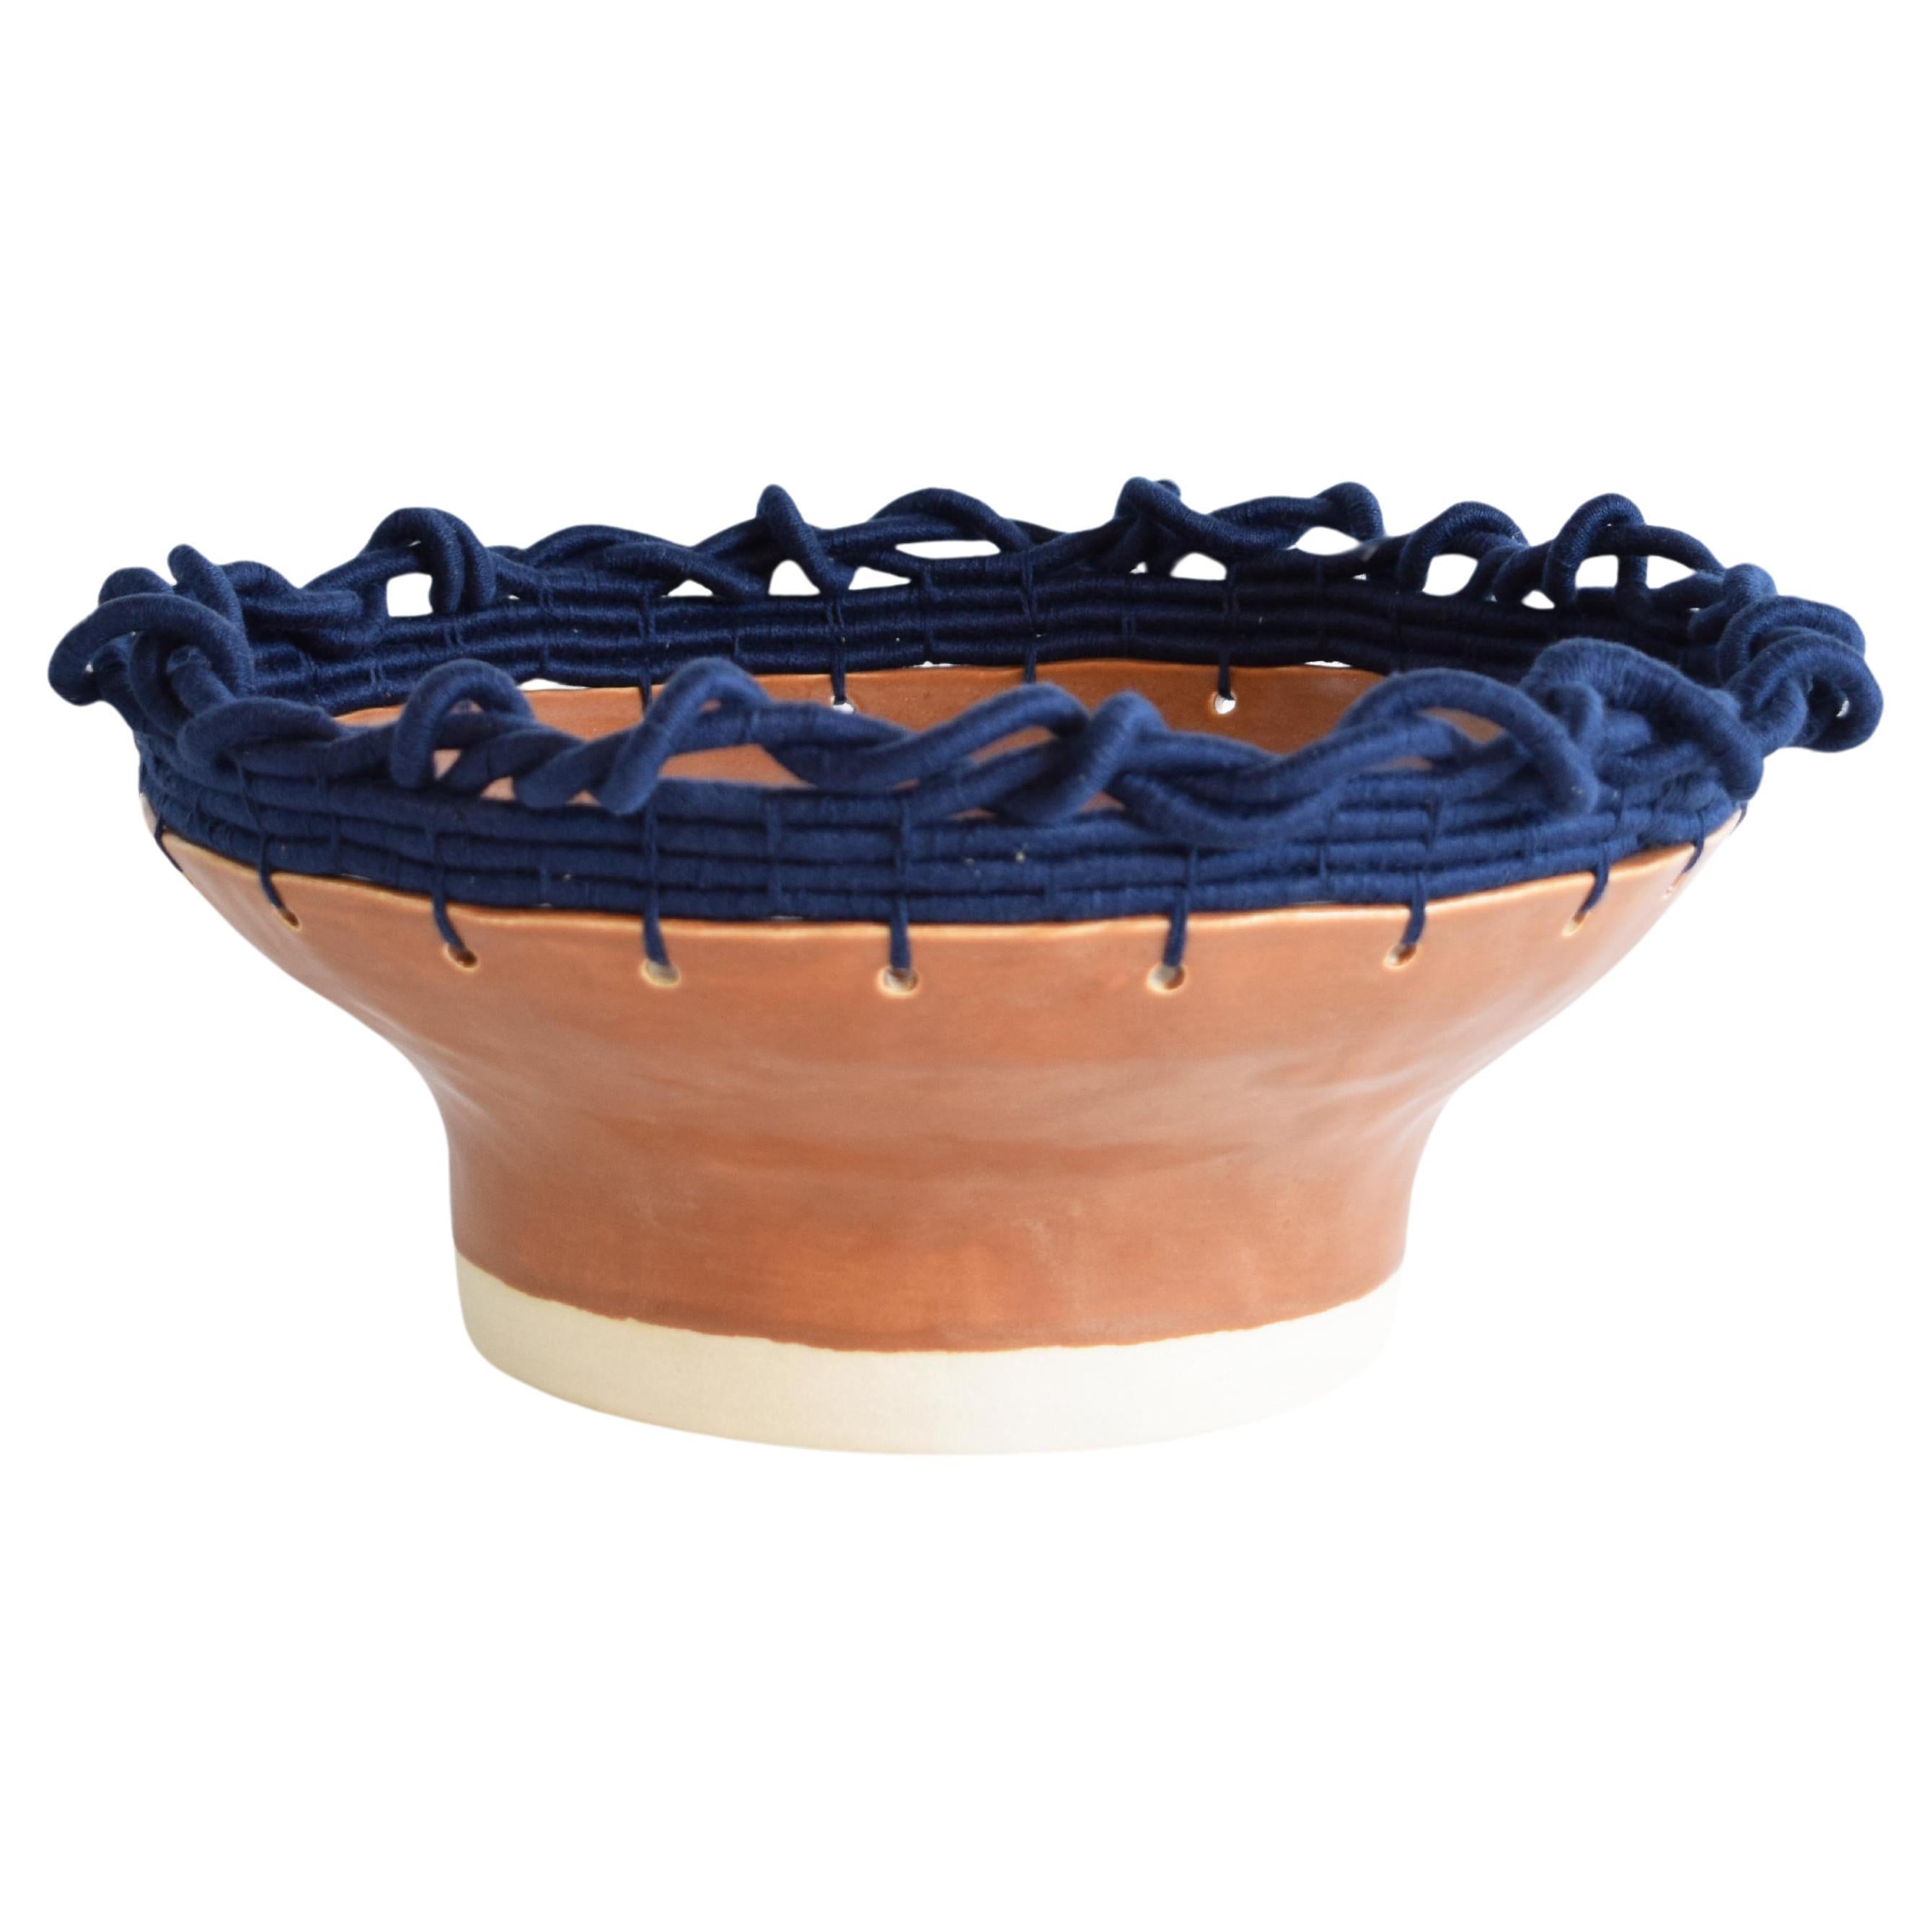 One of a Kind Handmade Ceramic Bowl #803, Brown Glaze & Woven Navy Blue Cotton For Sale